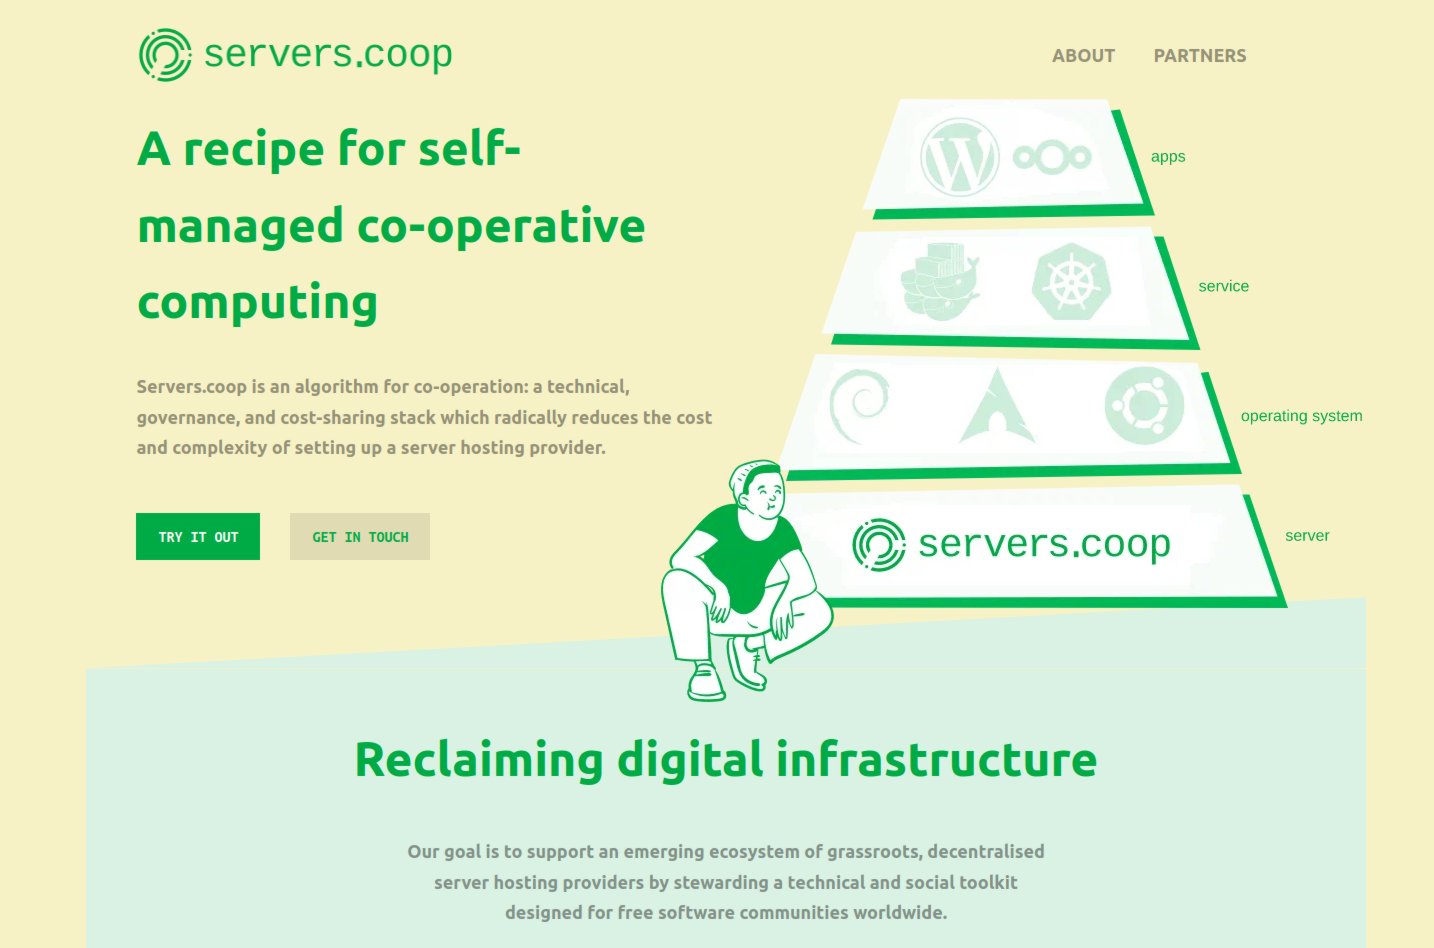 A screenshot of the servers.coop website, reads "A recipe for self-managed co-operative computing". a food-pyramid-like diagram showing applications at the top, sitting on top of services like docker swarm and kubernetes, resting on top of operating systems like debian, ubuntu and arch linux, all resting on top of servers  with the servers.coop logo. A drawing of a cute androgynous person in a beanie hat squatting next to the pyramid, above  "Reclaiming Digital Infrastructure"